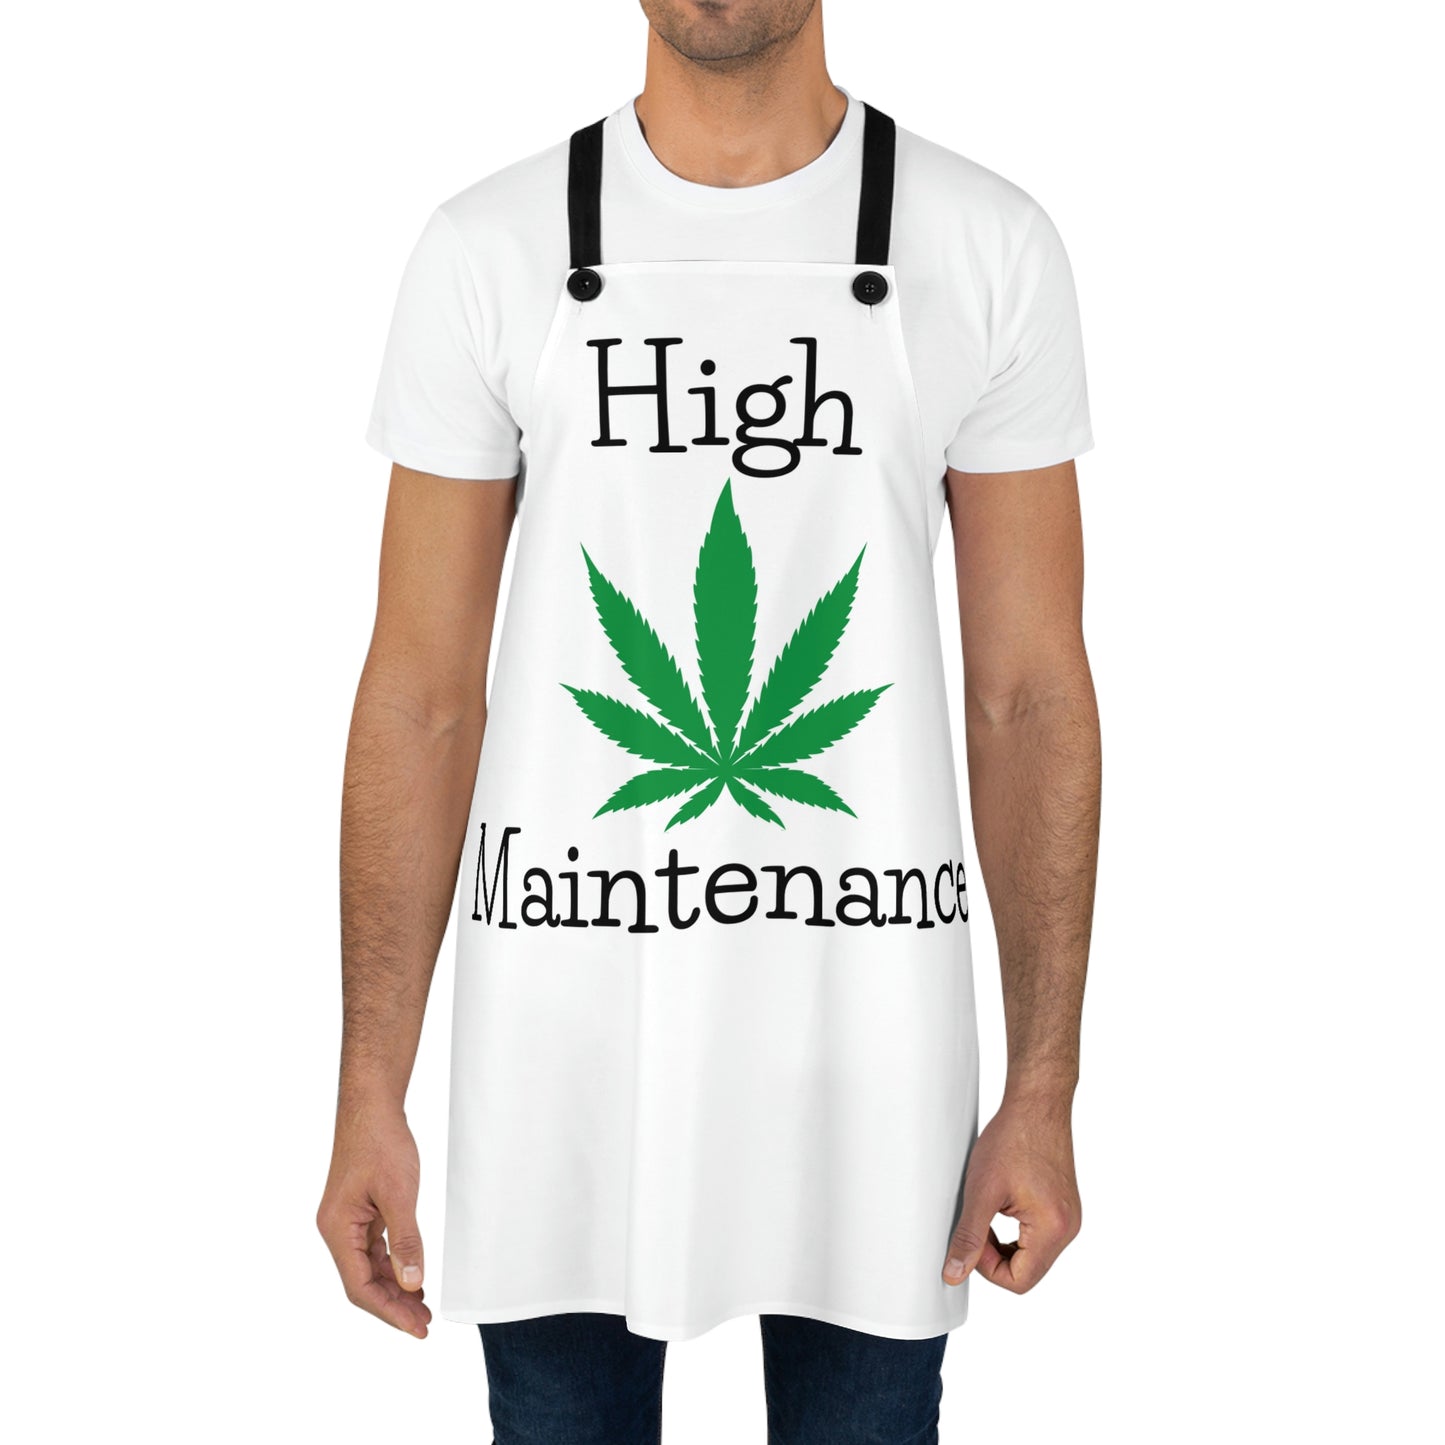 A man is wearing the High Maintenance Marijuana Chef's Apron with green cannabis leaf in the center